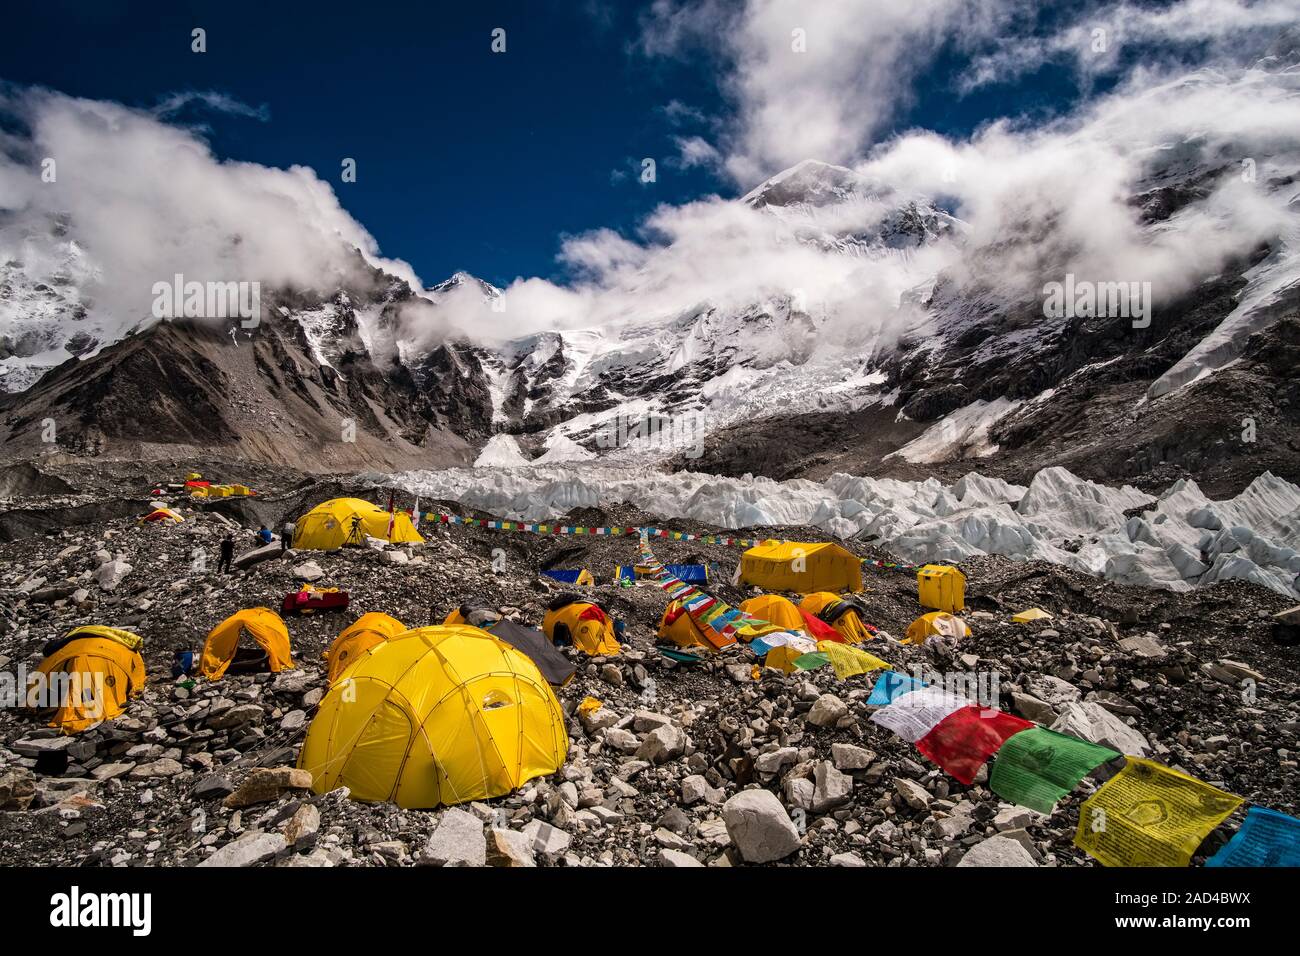 Tents set up at Everest Base Camp on Khumbu glacier, Mt. Everest behind covered by monsoon clouds Stock Photo